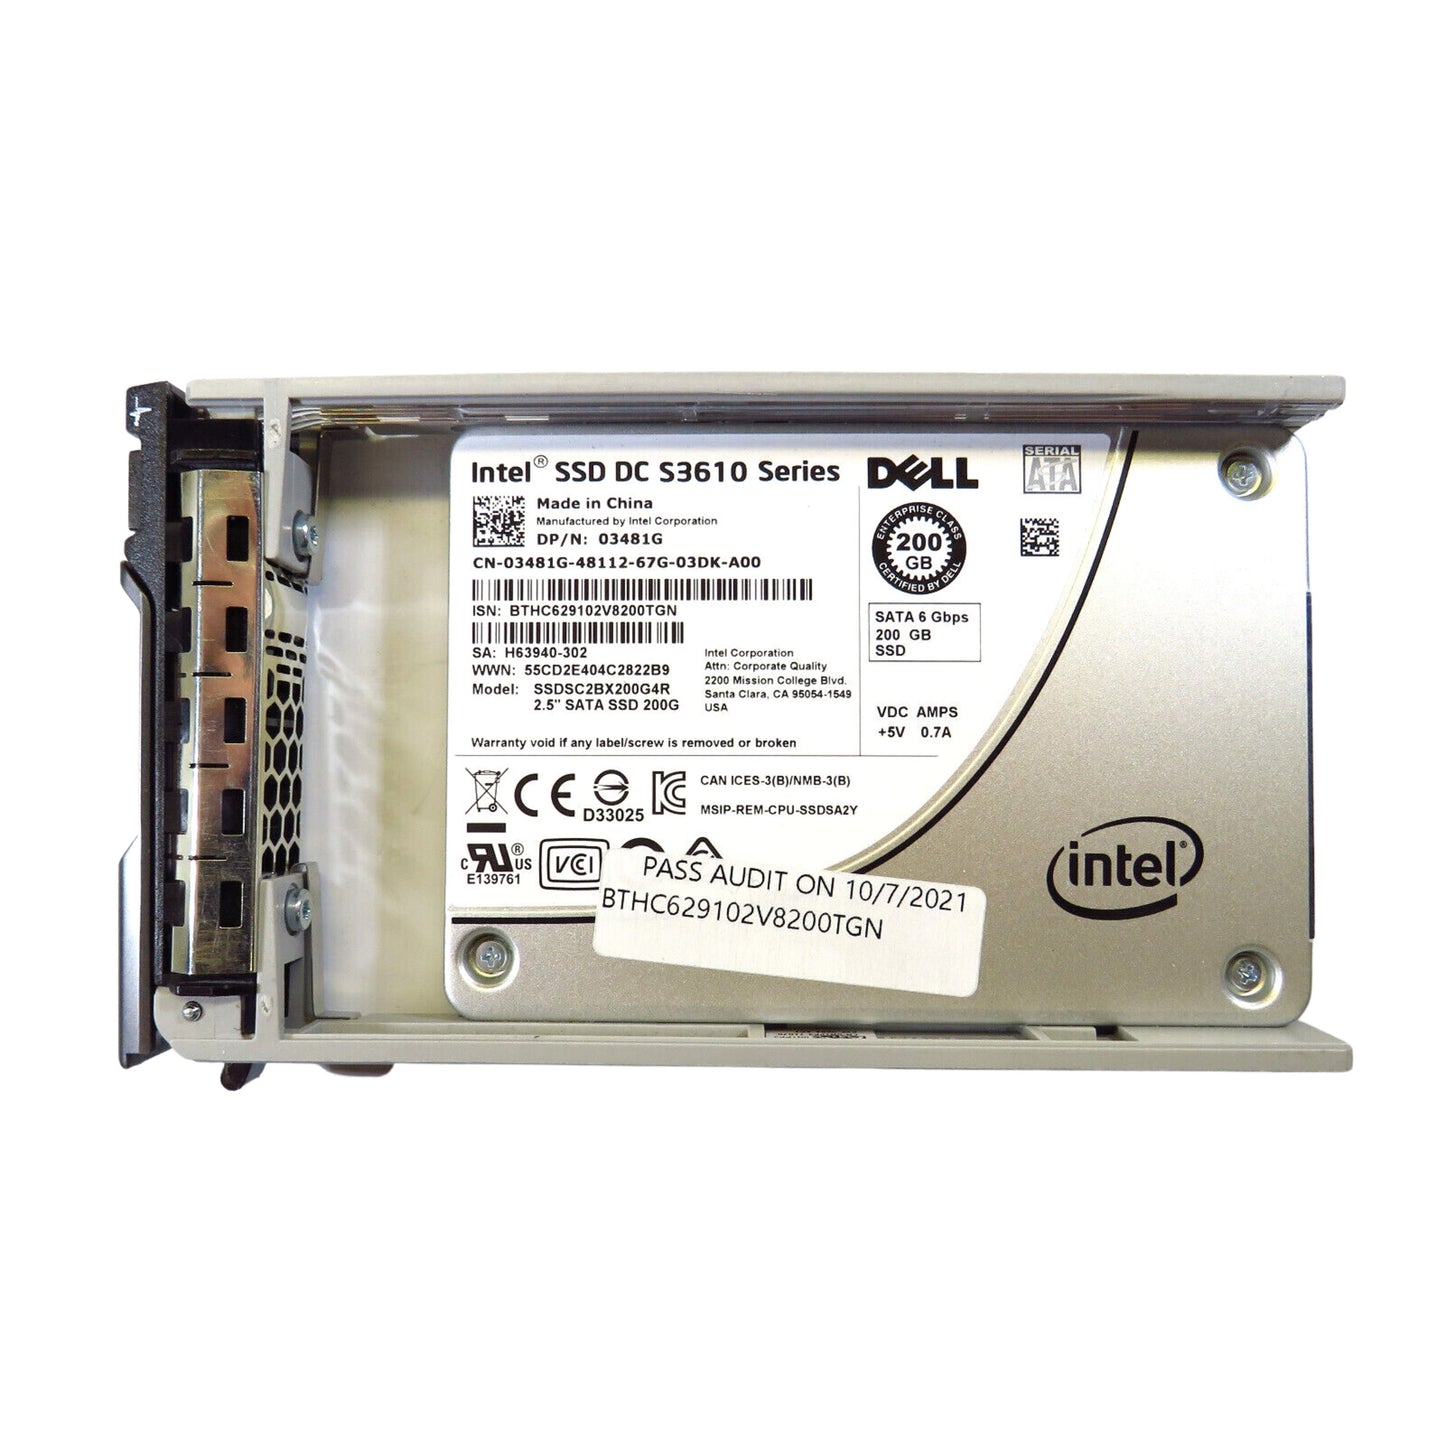 Dell 3481G DC S3610 200GB 2.5" SATA 6Gbps MLC SSD Solid State Drive w/ Tray (Refurbished)